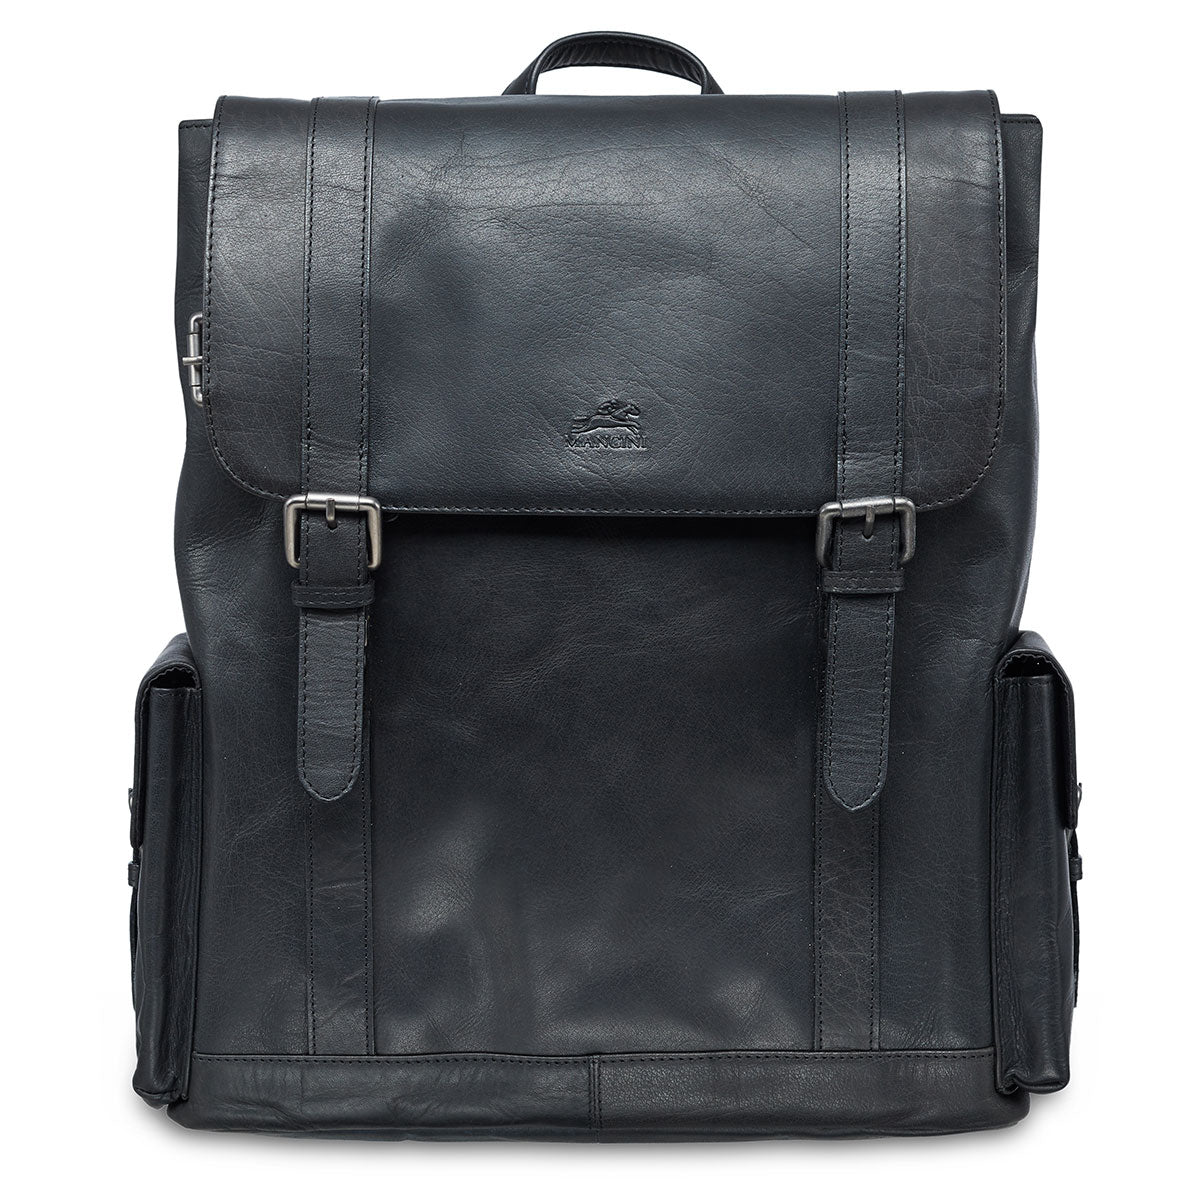 Mancini Leather Backpack for 15'' Laptop, 12.75" x 5.25" x 14.5", Black